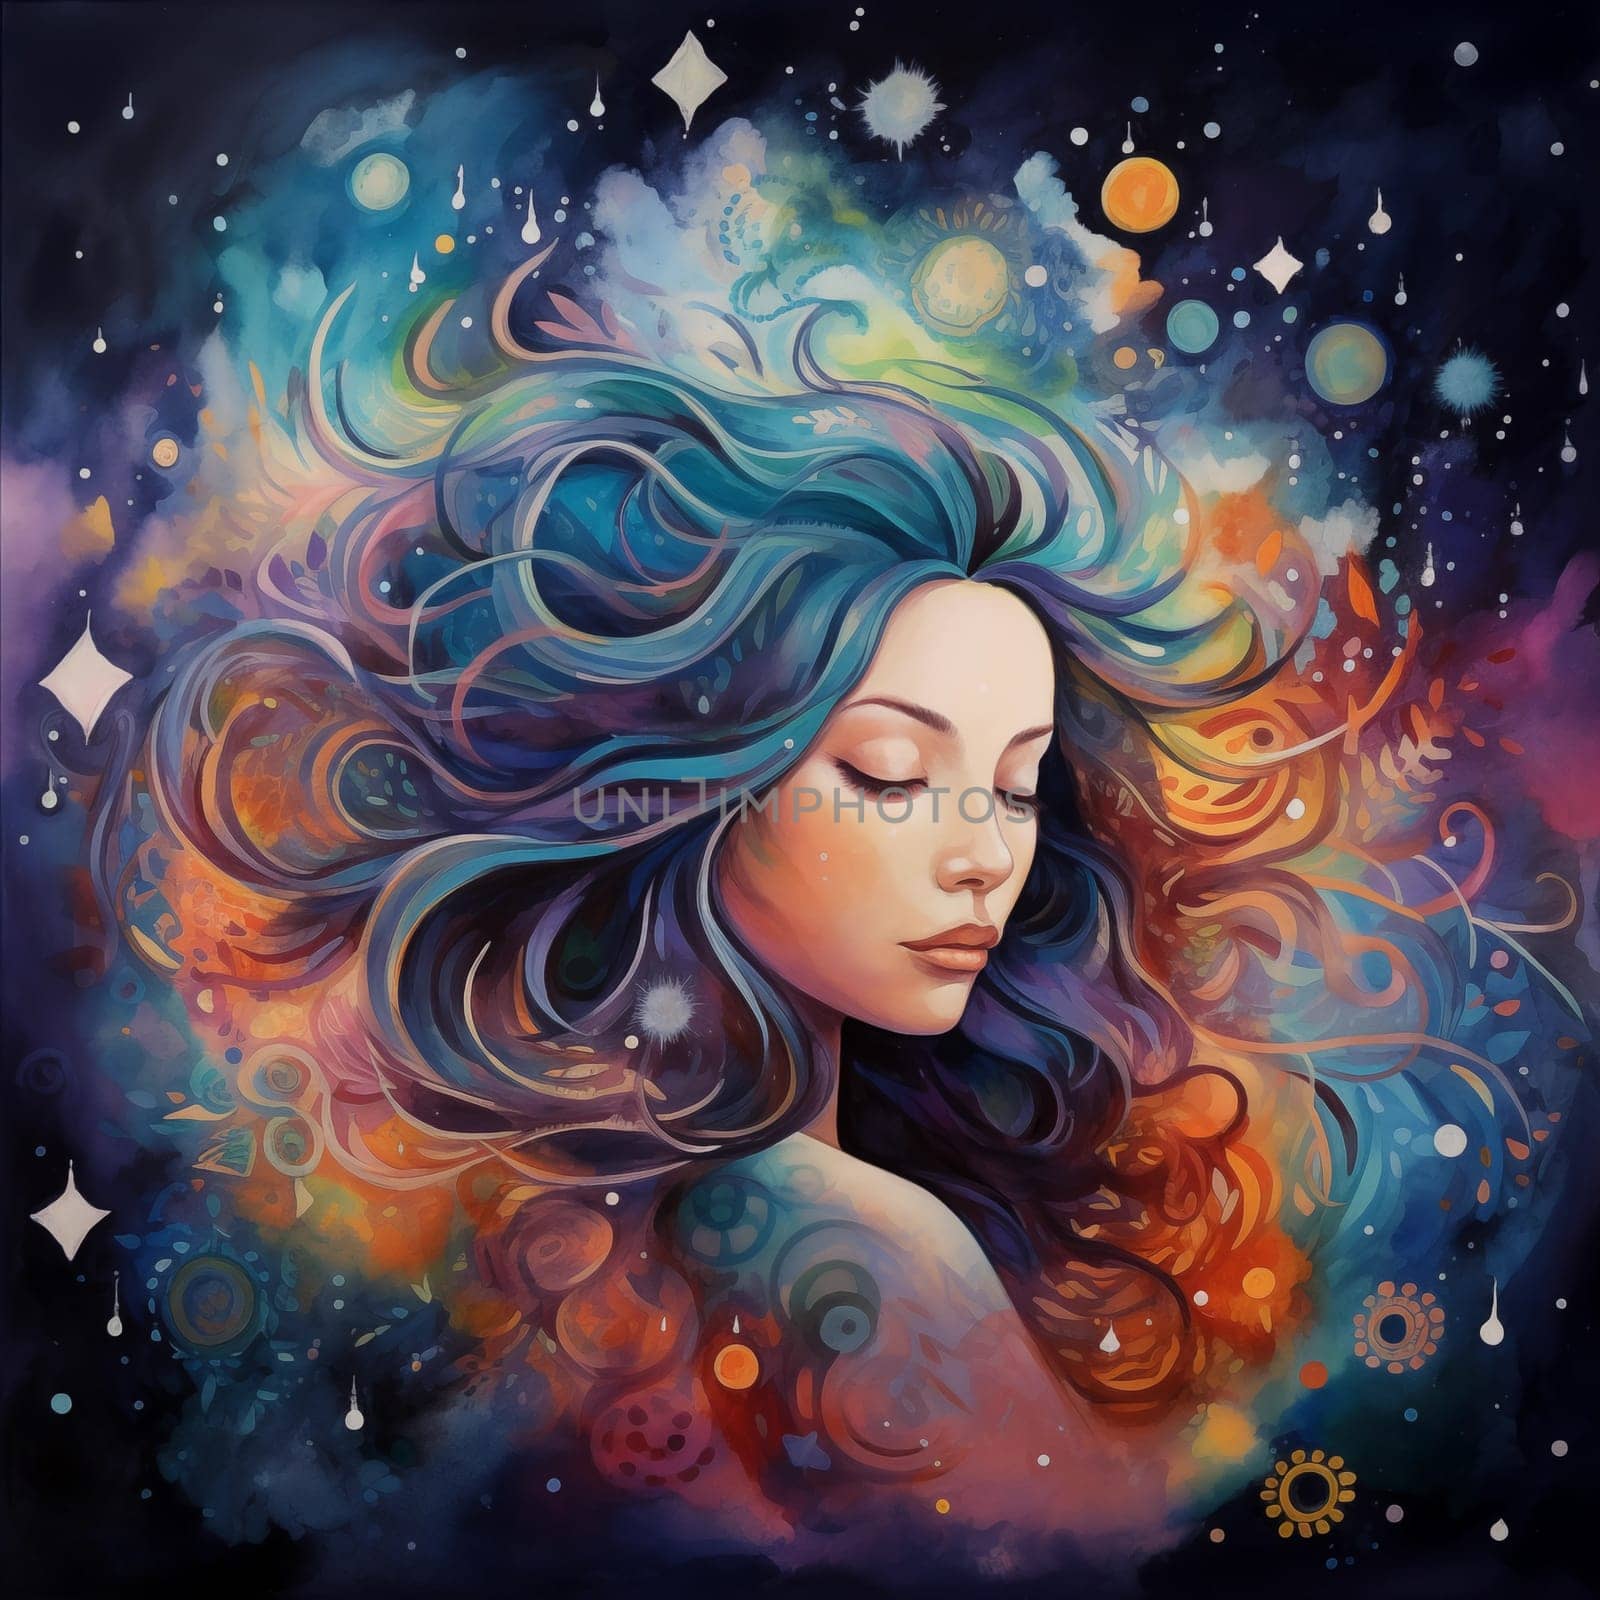 A girl meditating with closed eyes and flowing hair against a cosmic background with nebulae. Close-up. Colorful illustration capturing the serenity and beauty of meditation amidst the cosmic wonders. by veronawinner